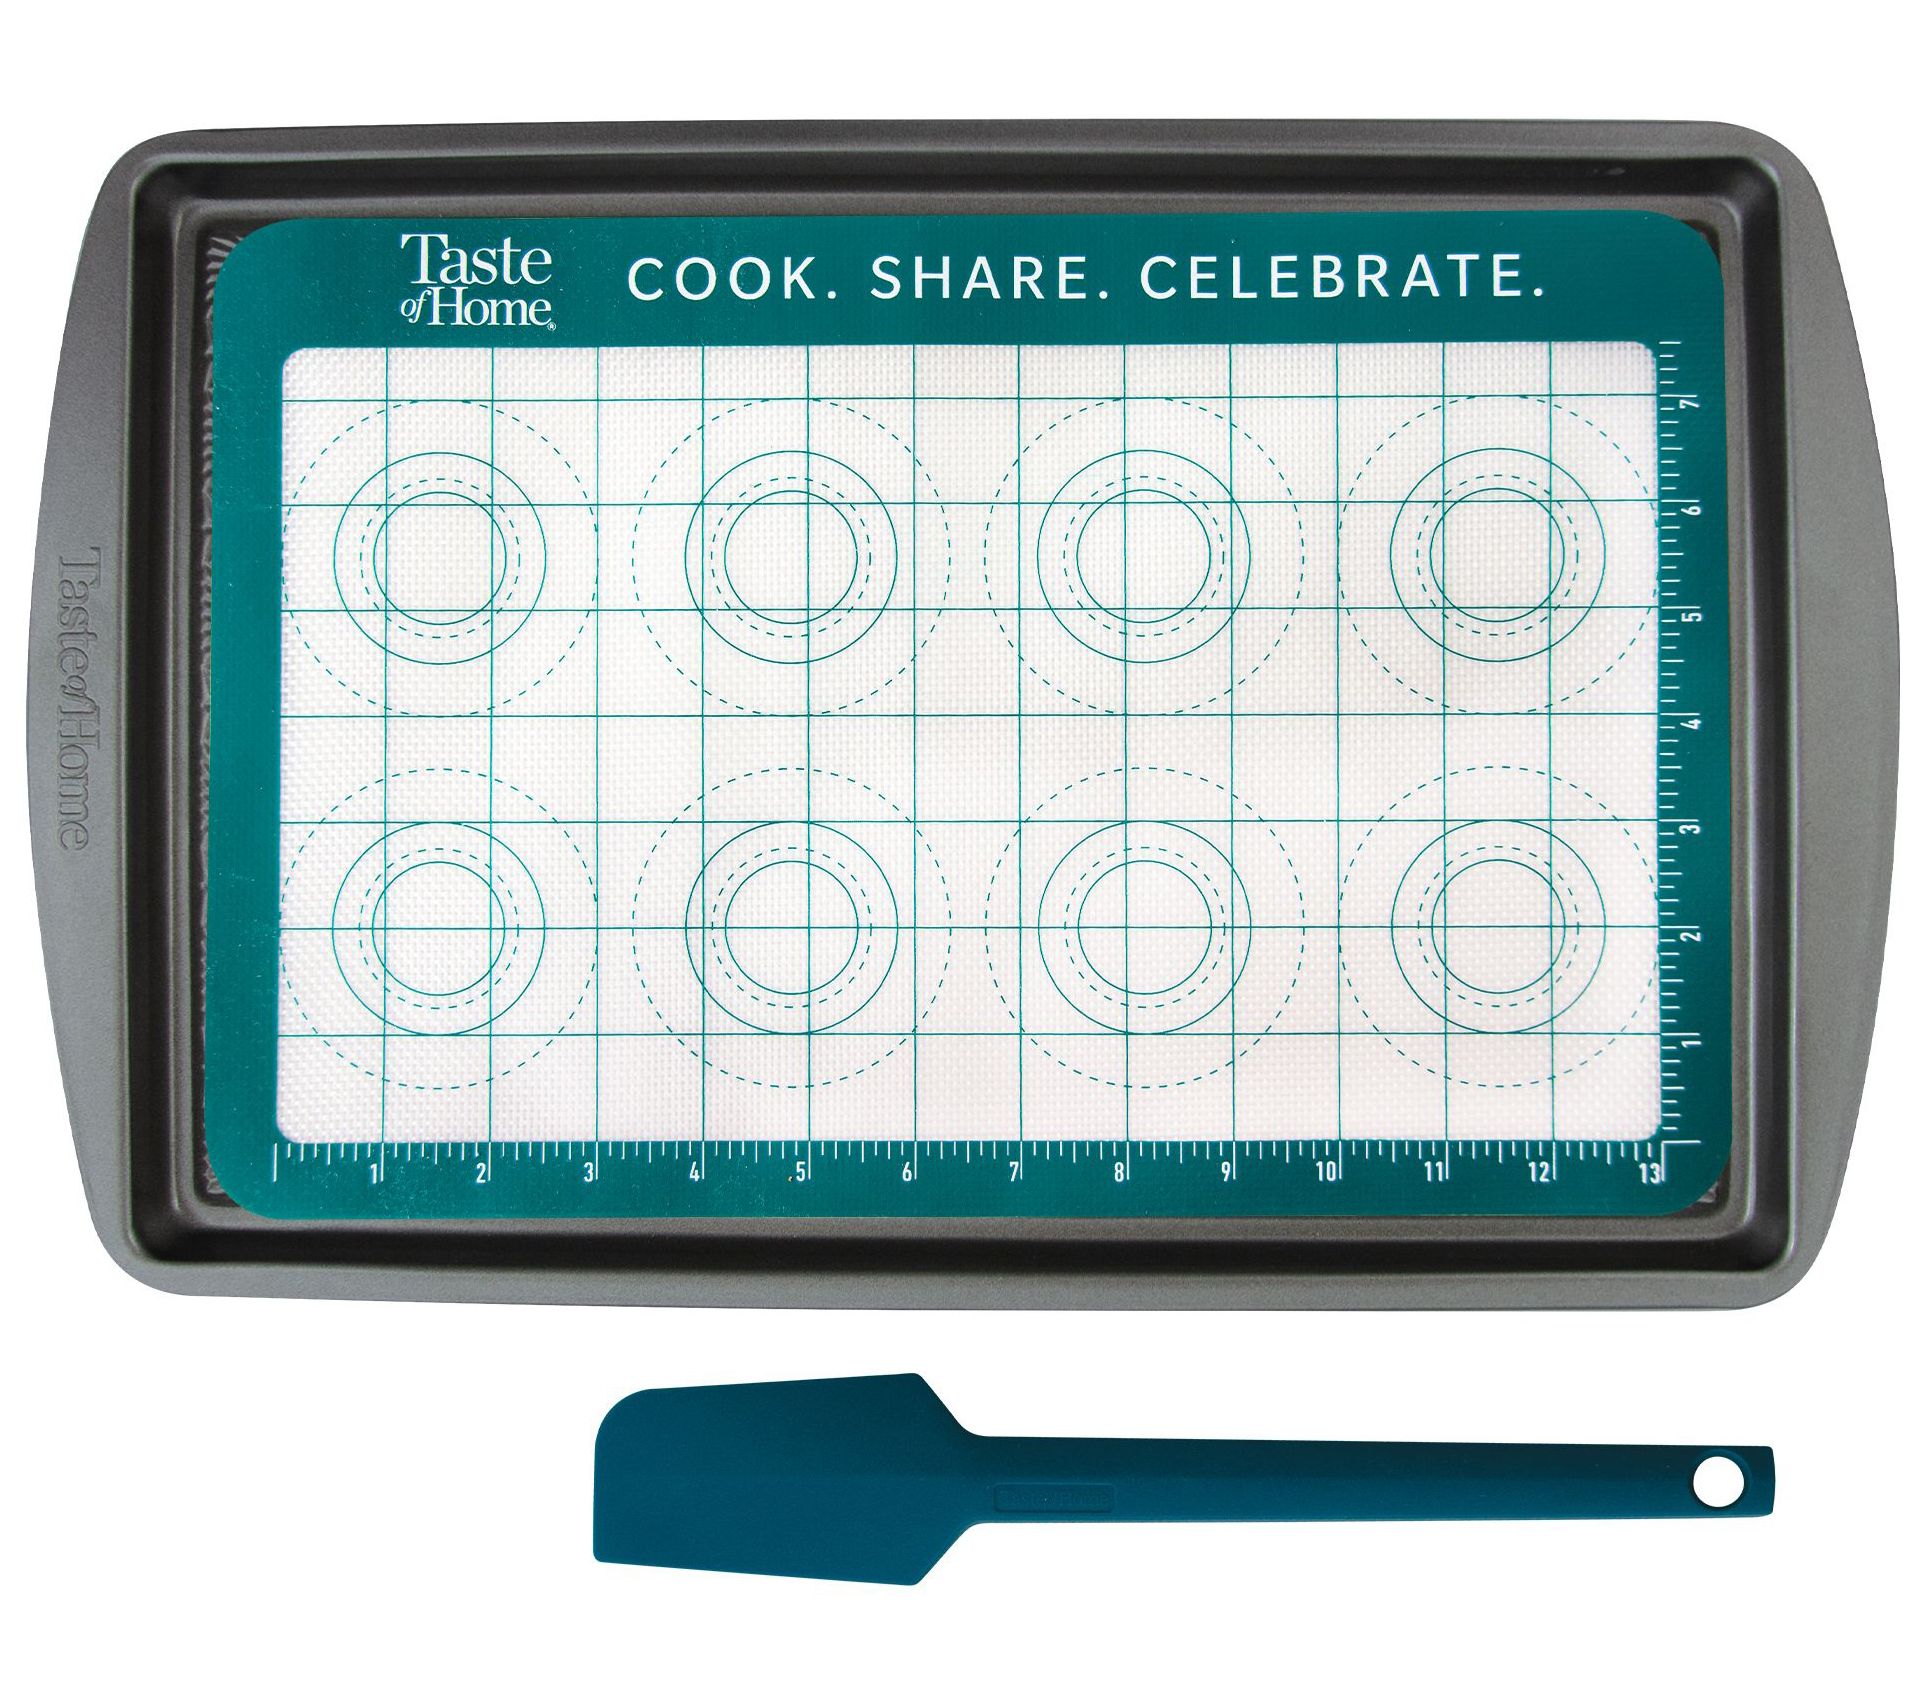  We R Memory Keepers -Tab Punch Board : Home & Kitchen